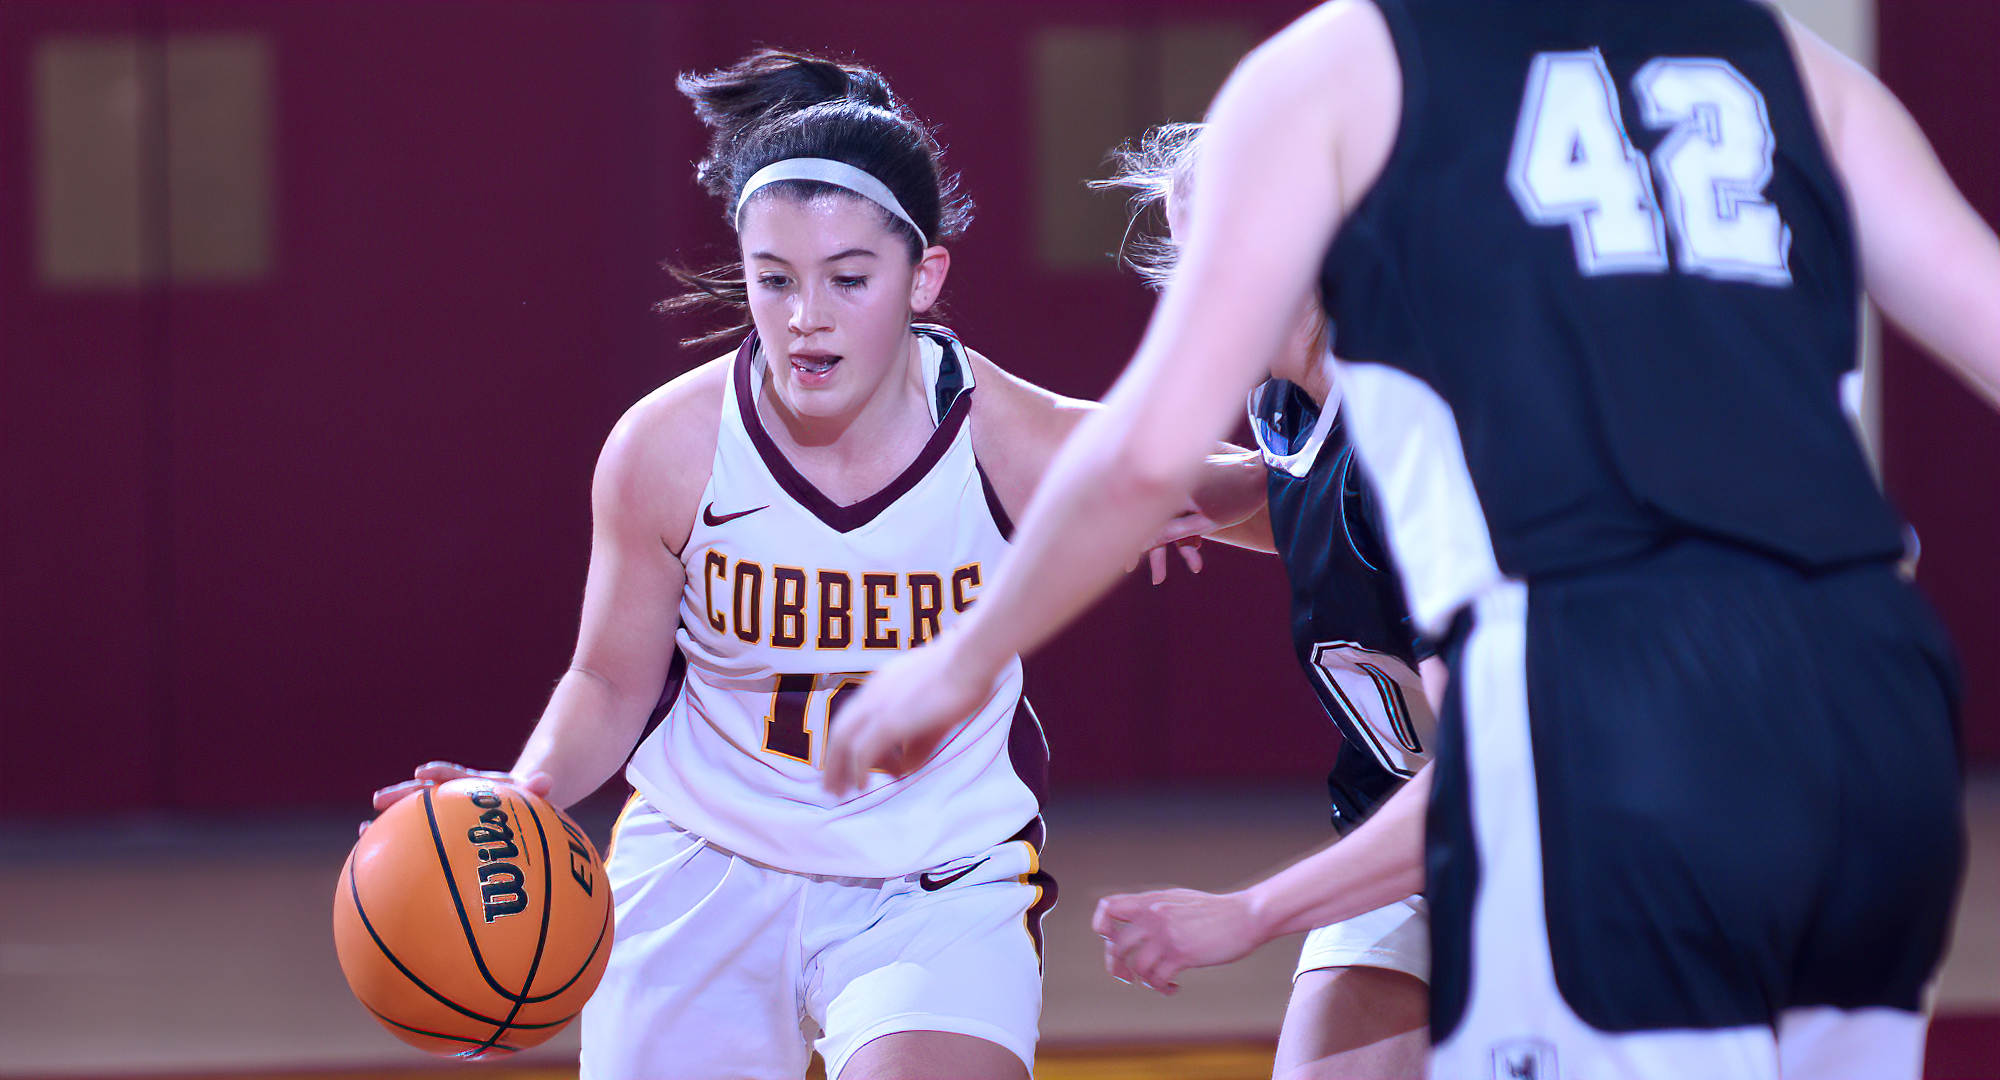 Freshman Taylor Jordan went 2-for-2 from the floor, 1-for-1 from distance and finished with a season-high five points in the CC's game at Augsburg.